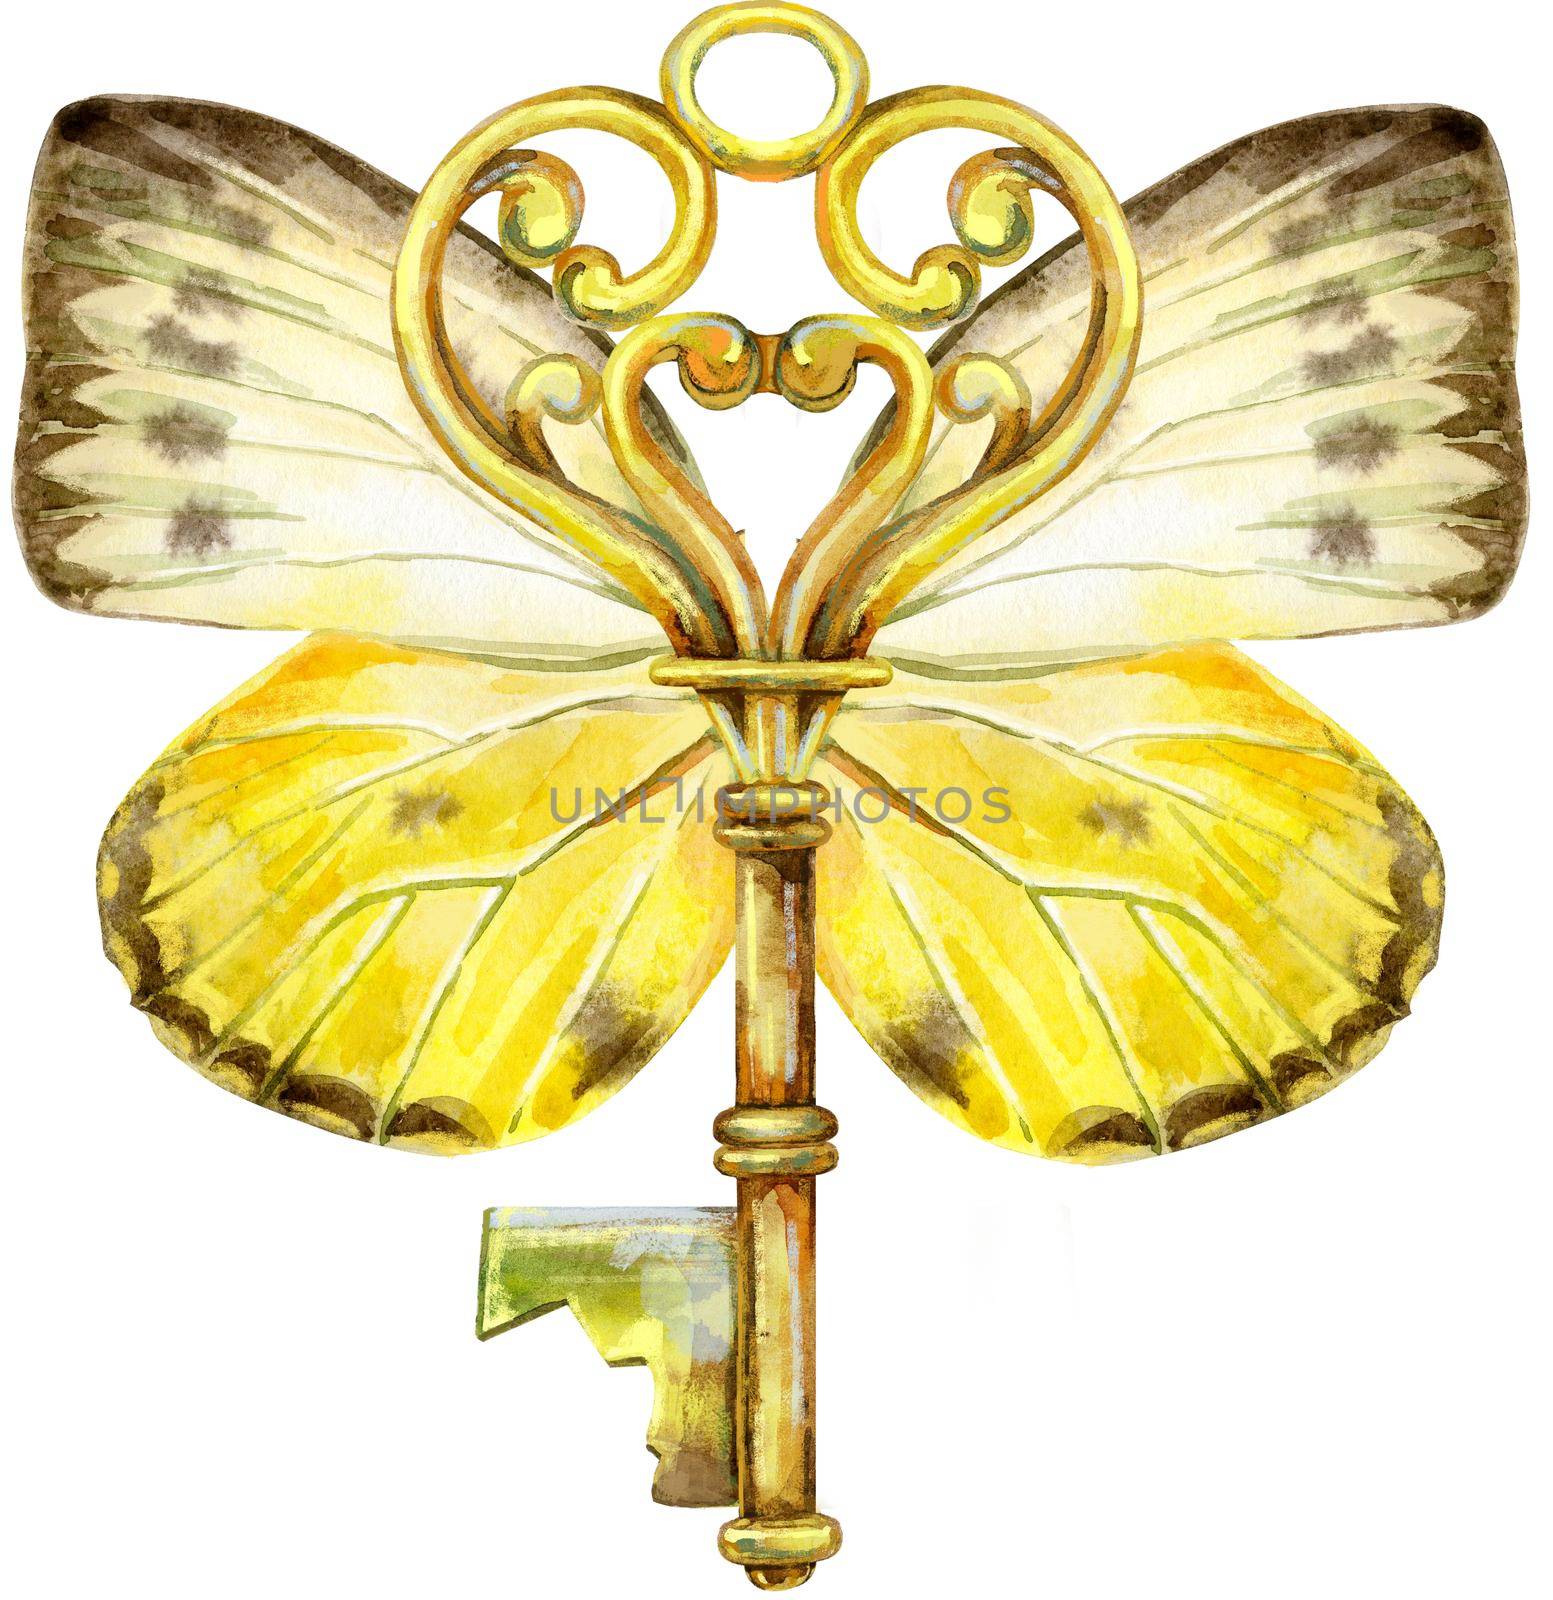 Golden key with butterfly wings. Watercolor illustration on a white background